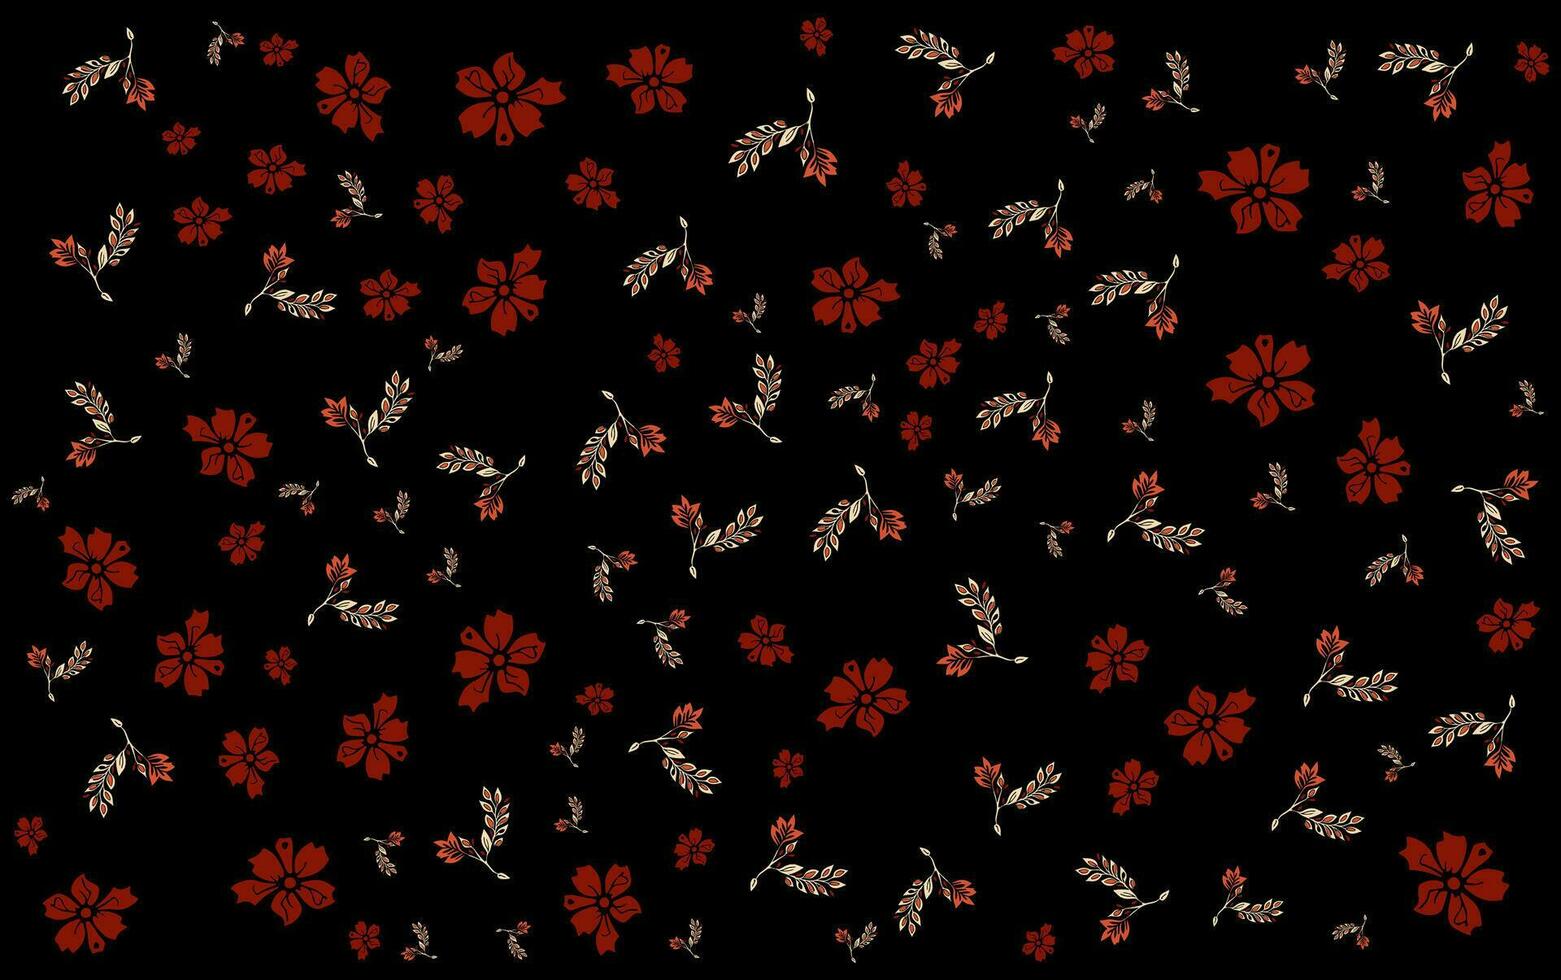 red flowers on a black background with bontical leaves vector